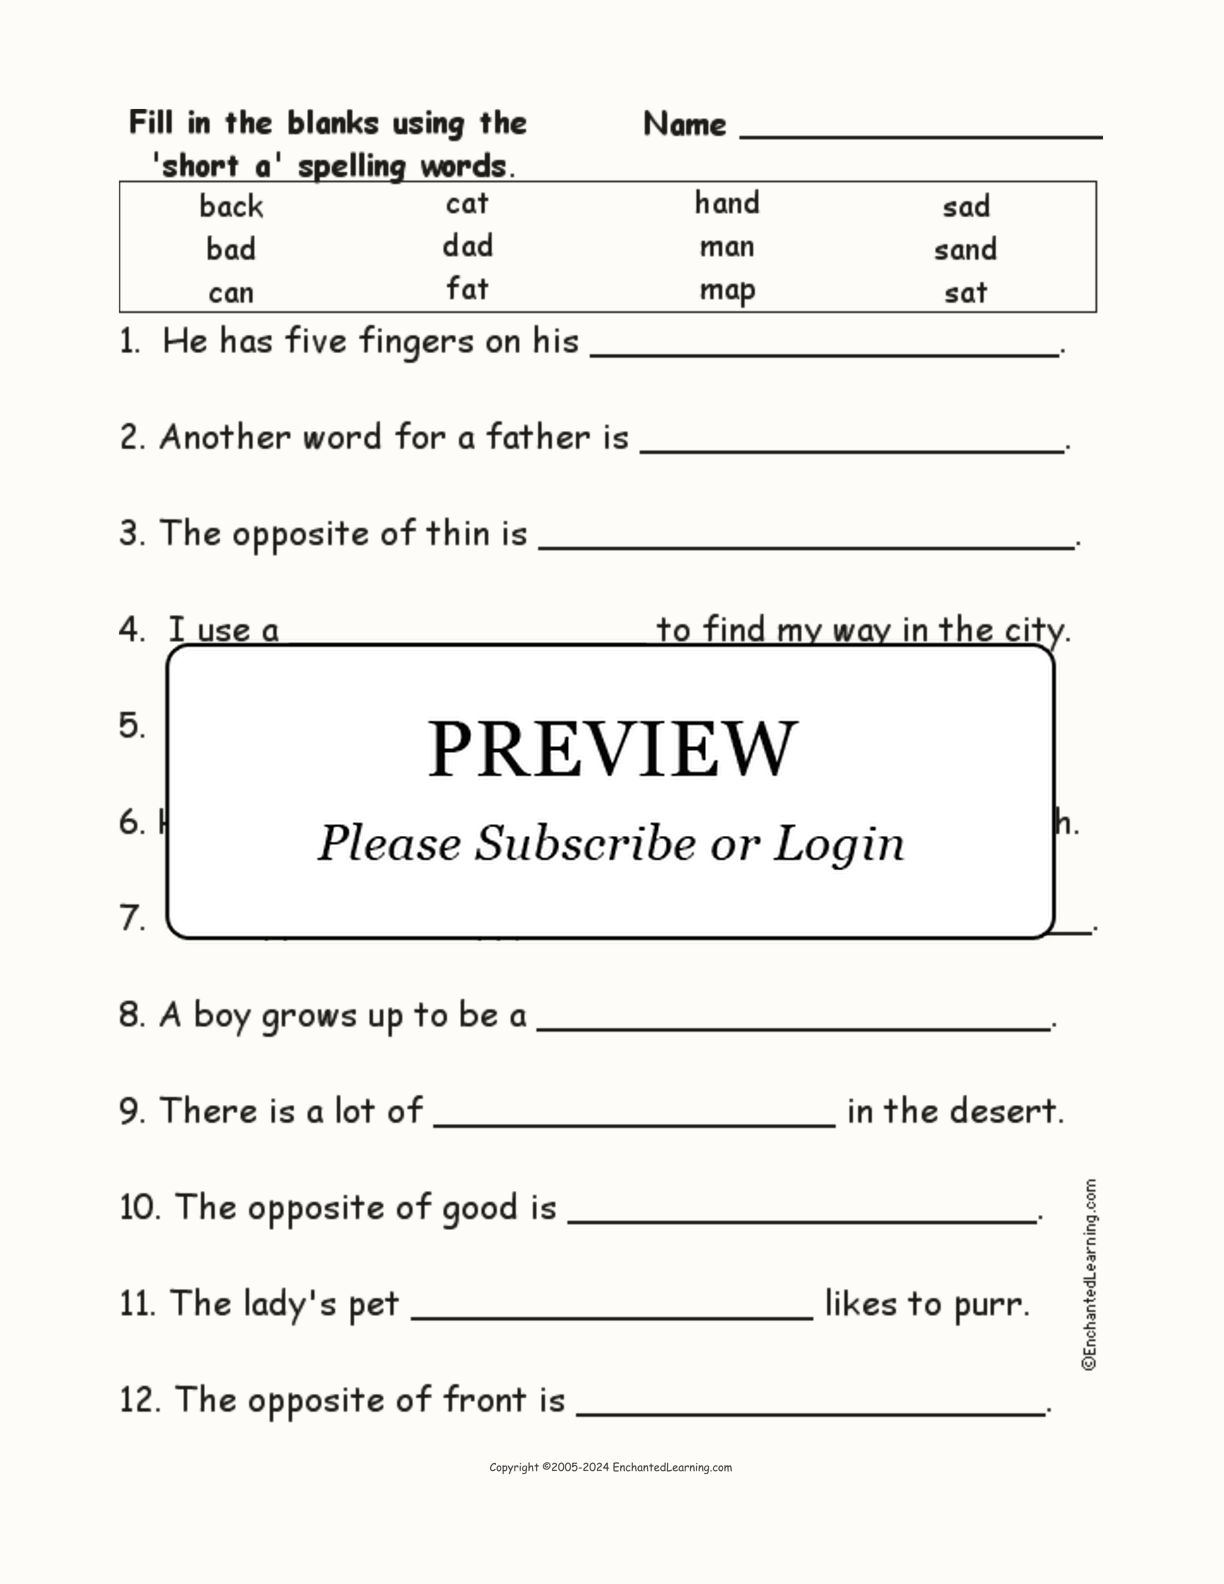 Short A: Spelling Word Questions interactive worksheet page 1